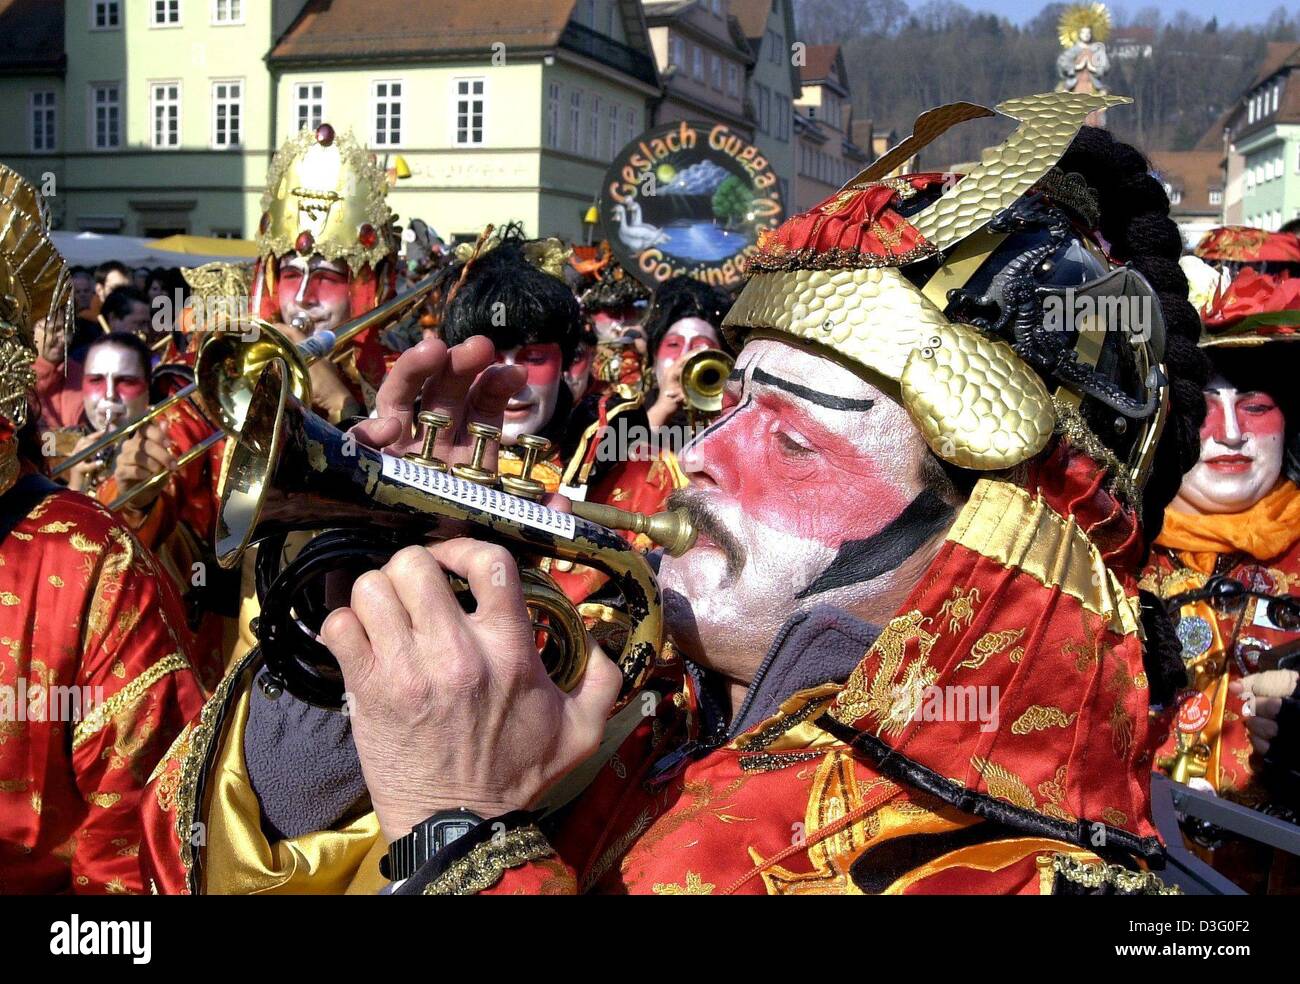 (dpa) - Carnival enthusiasts dressed up in Japanese costumes play Guggen music as they march through the streets of Schwaebisch Gmuend, southern Germany, 22 February 2003. 'Gugaaggeri Musig' is originally a characteristic feature of the Swiss carnival which is cultivated by several groups and has become well known far beyond the country. It consists of different instruments, includ Stock Photo